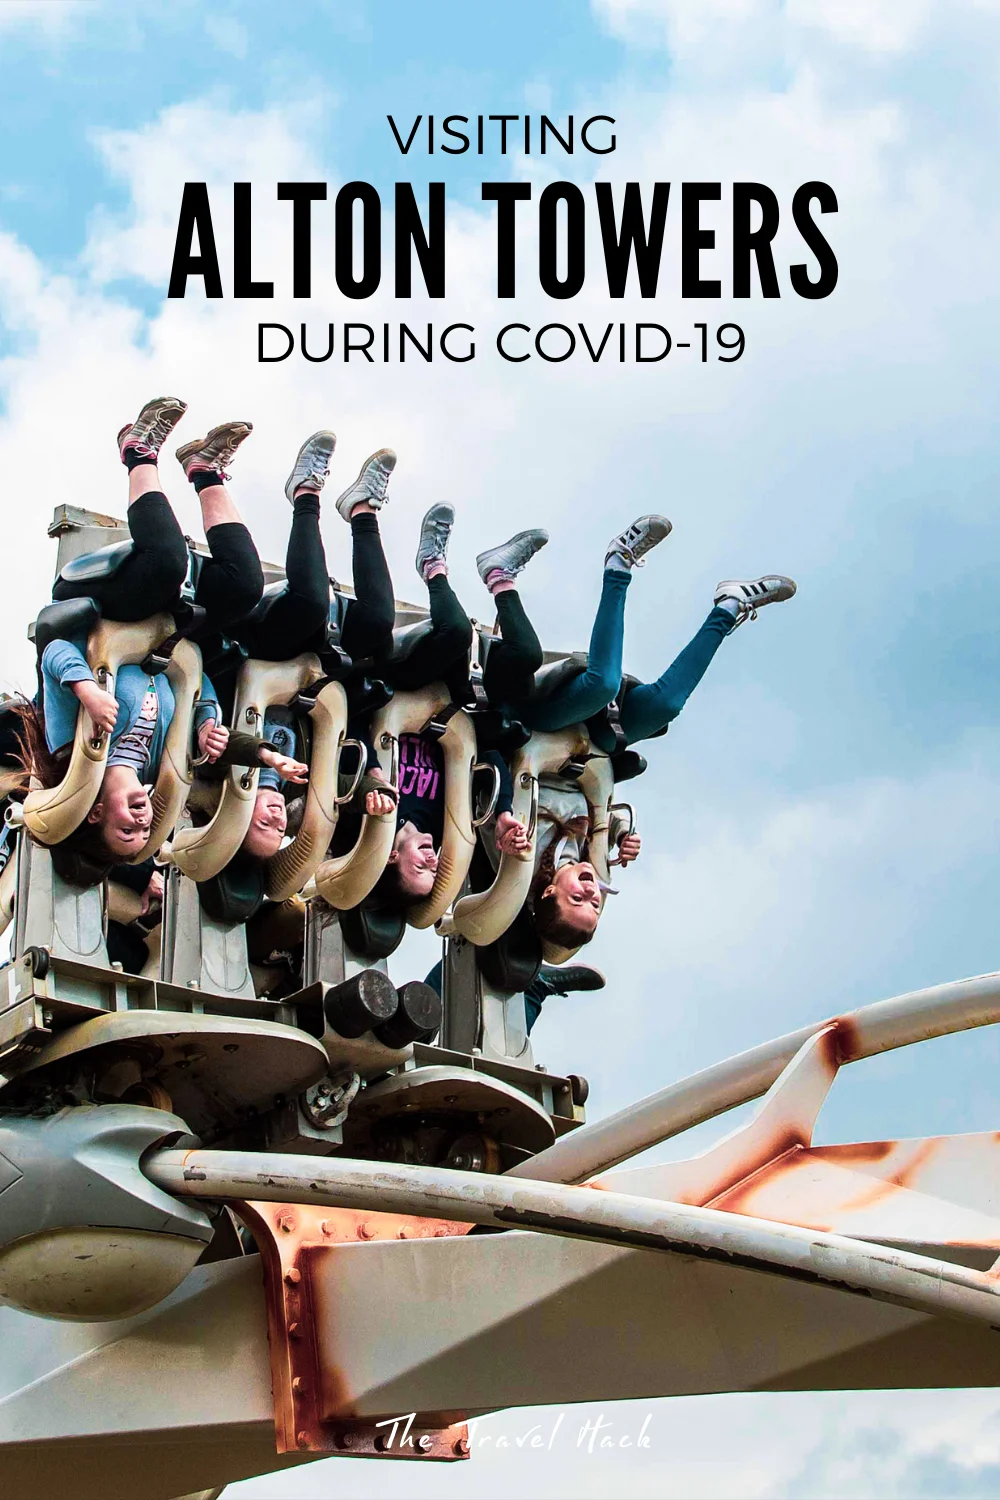 What's it like to visit Alton Towers during the Covid-19 pandemic?